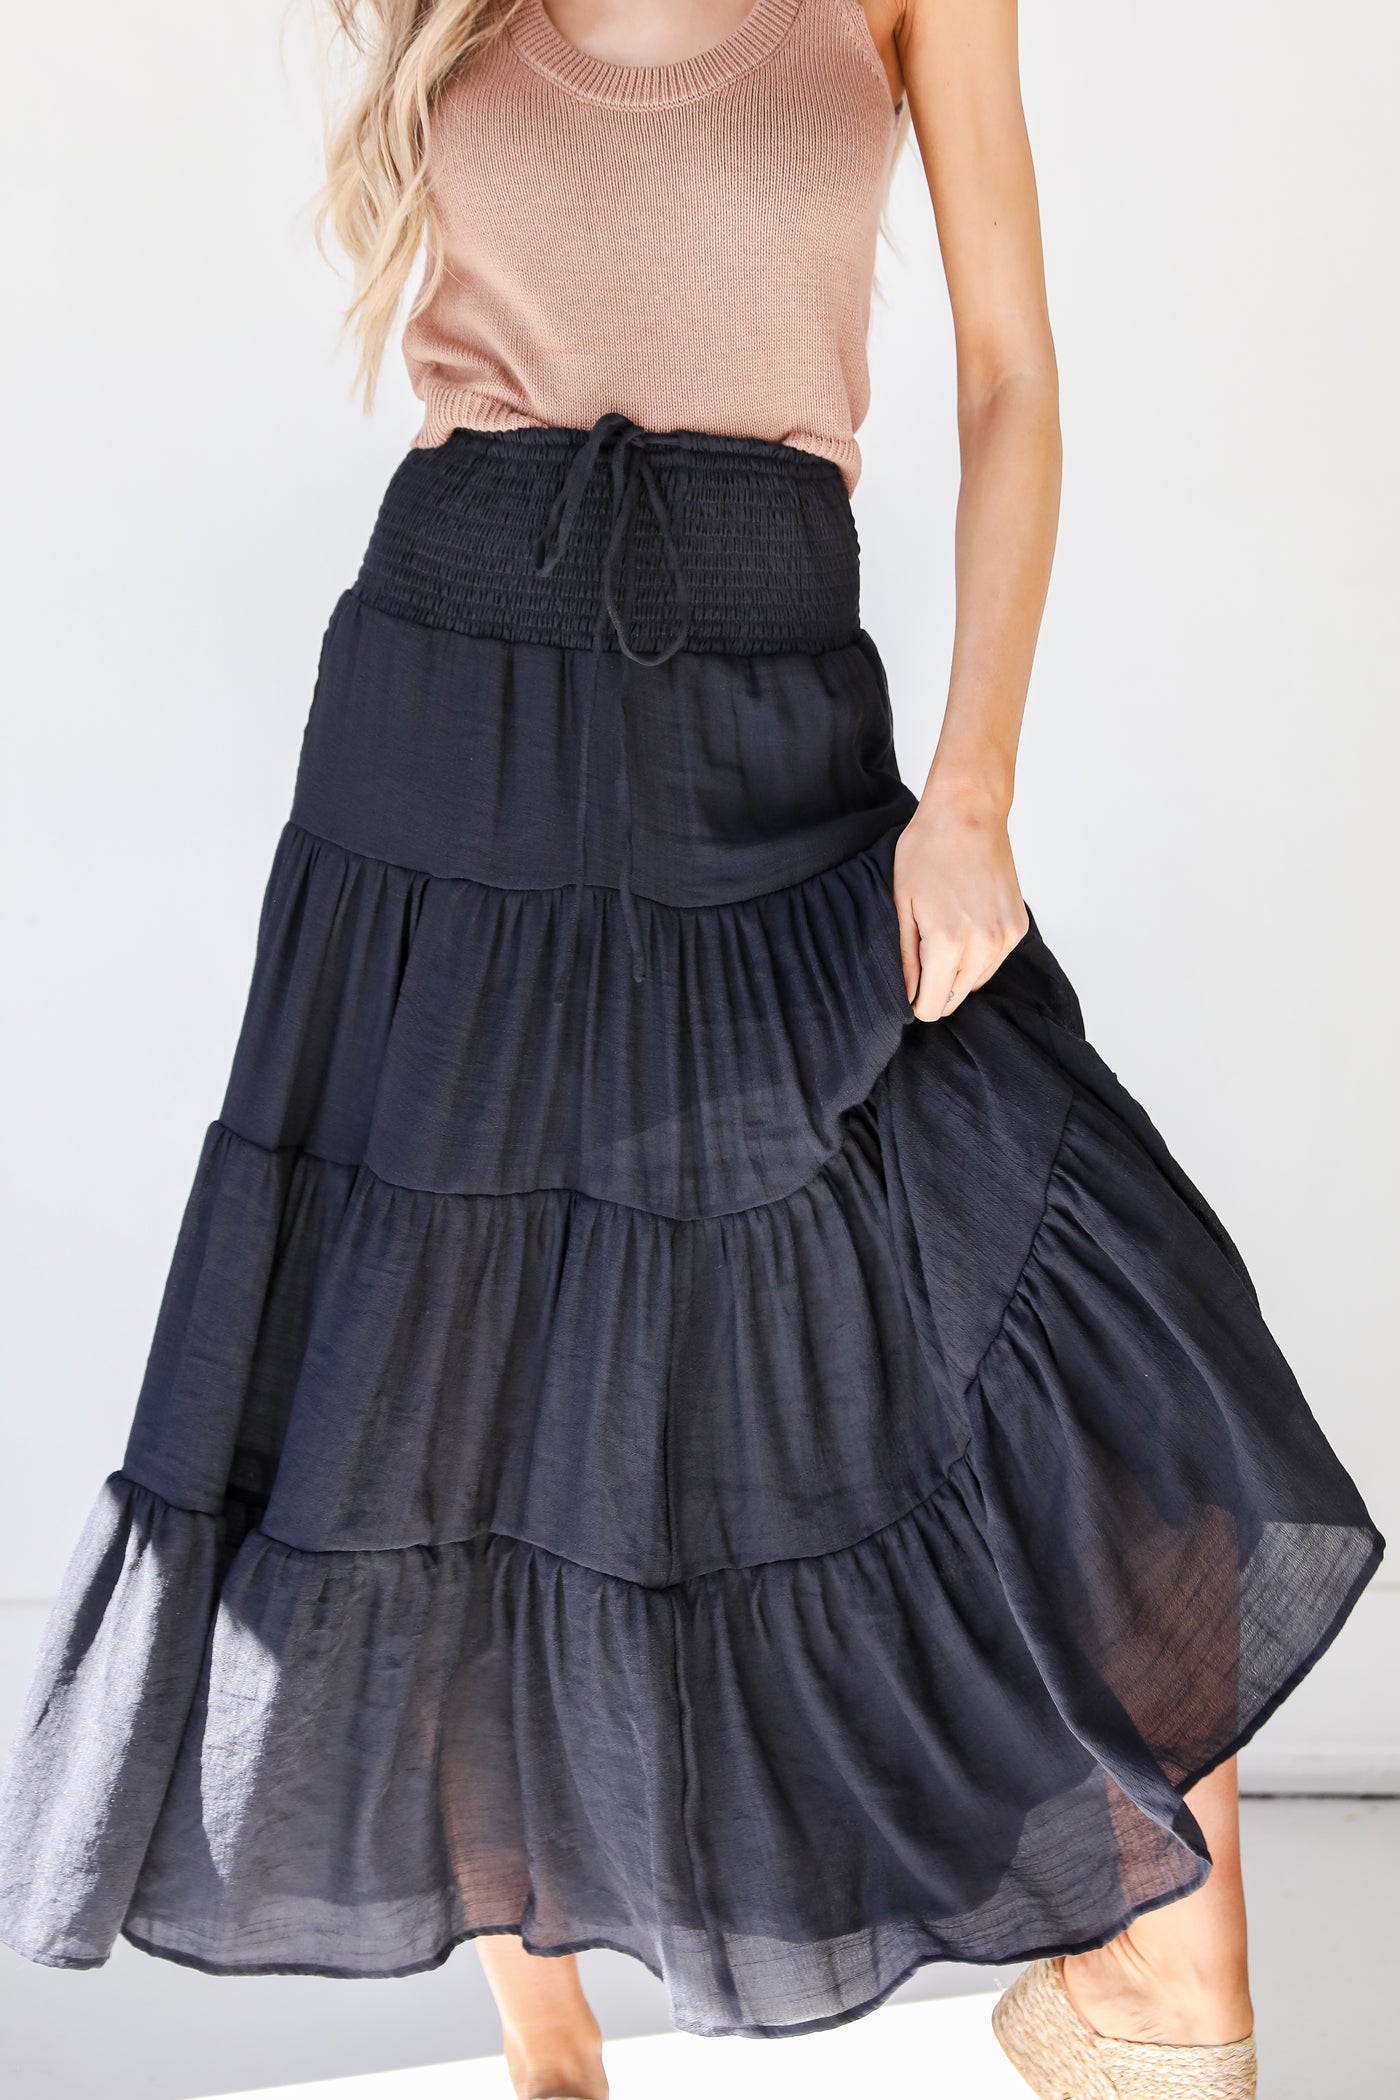 Tiered Maxi Skirt in black on model